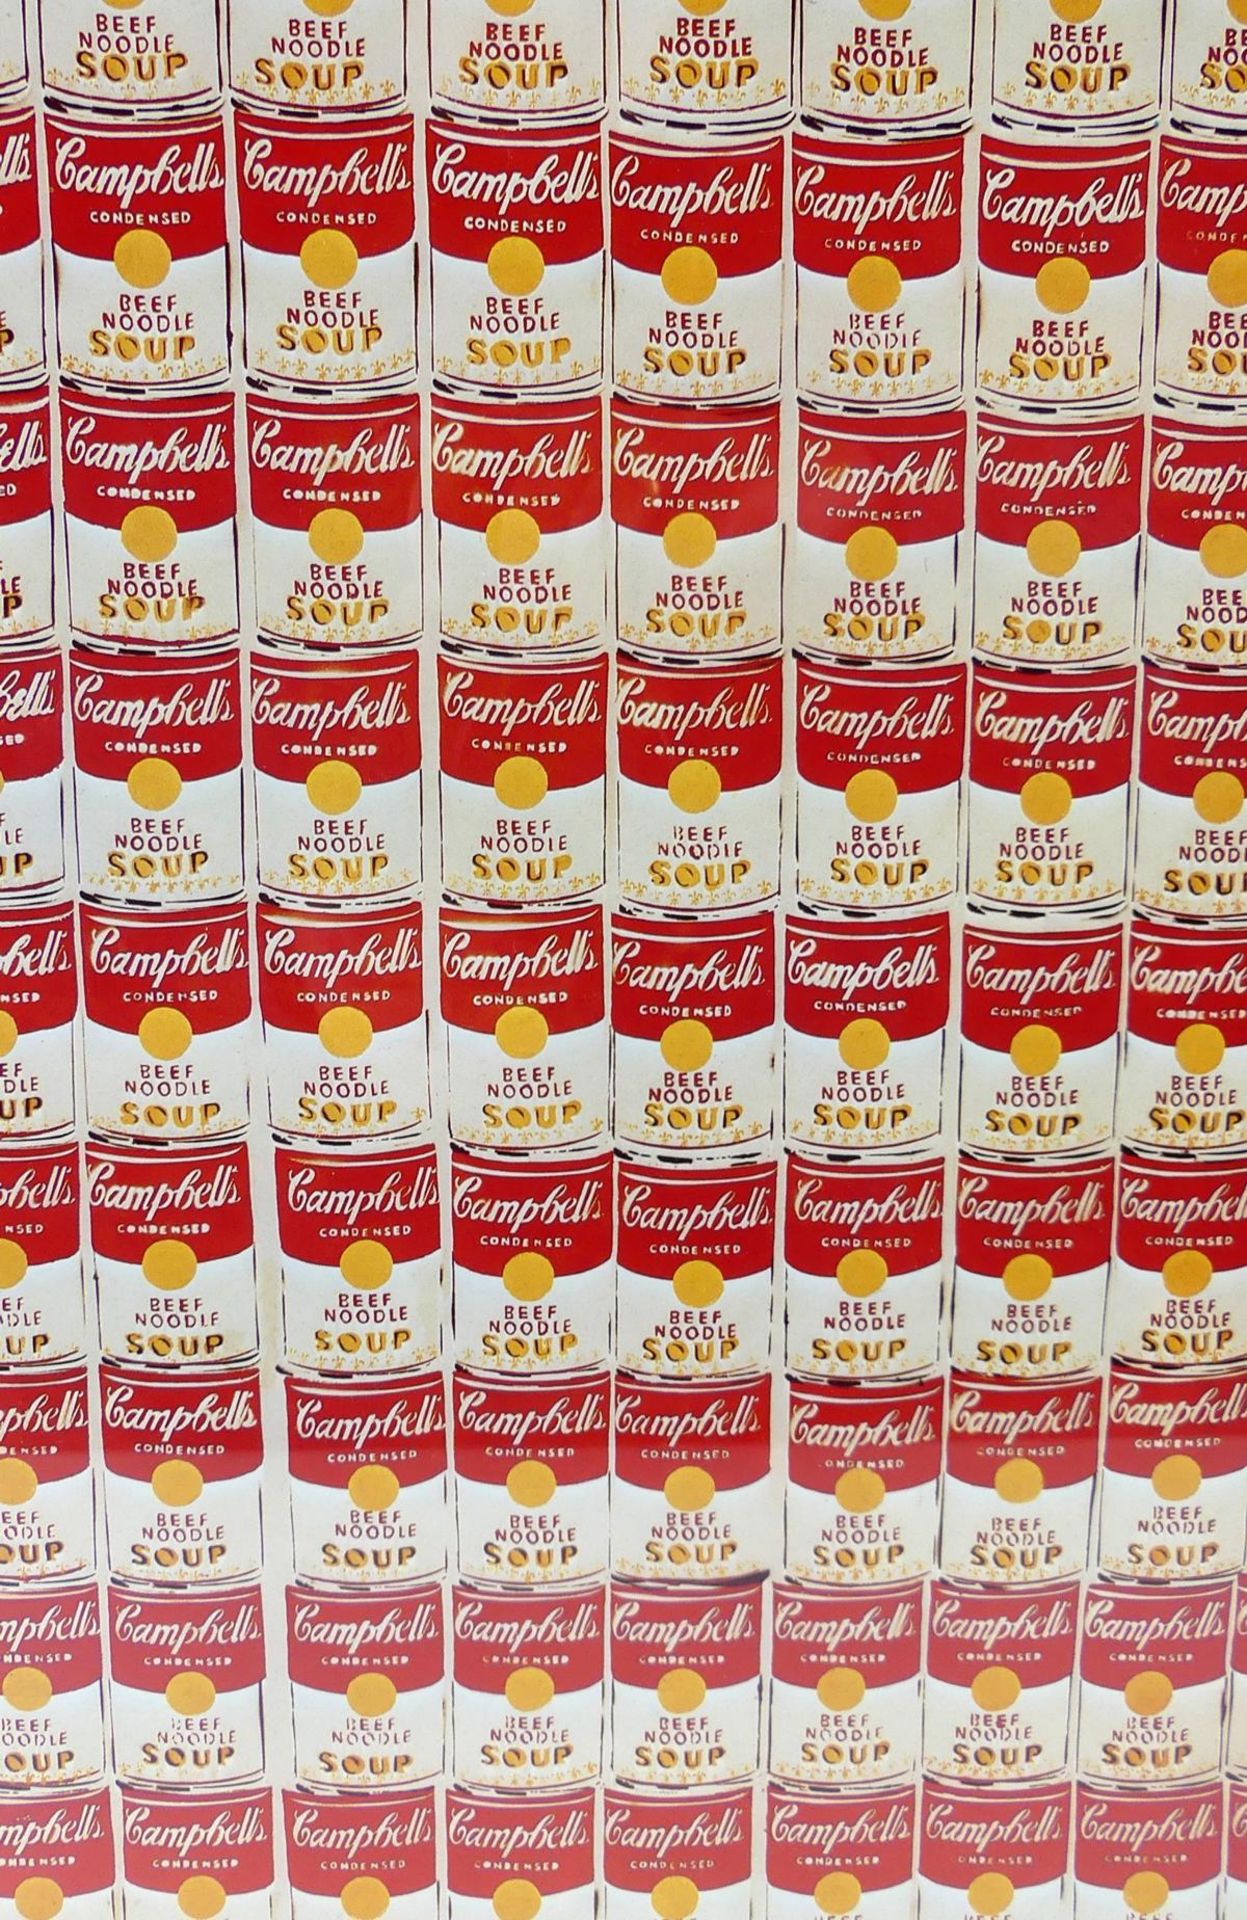 ANDY WARHOL (1928-1987), "Campbell's Soup Cans", Farboffsetlithographie, - Bild 2 aus 2